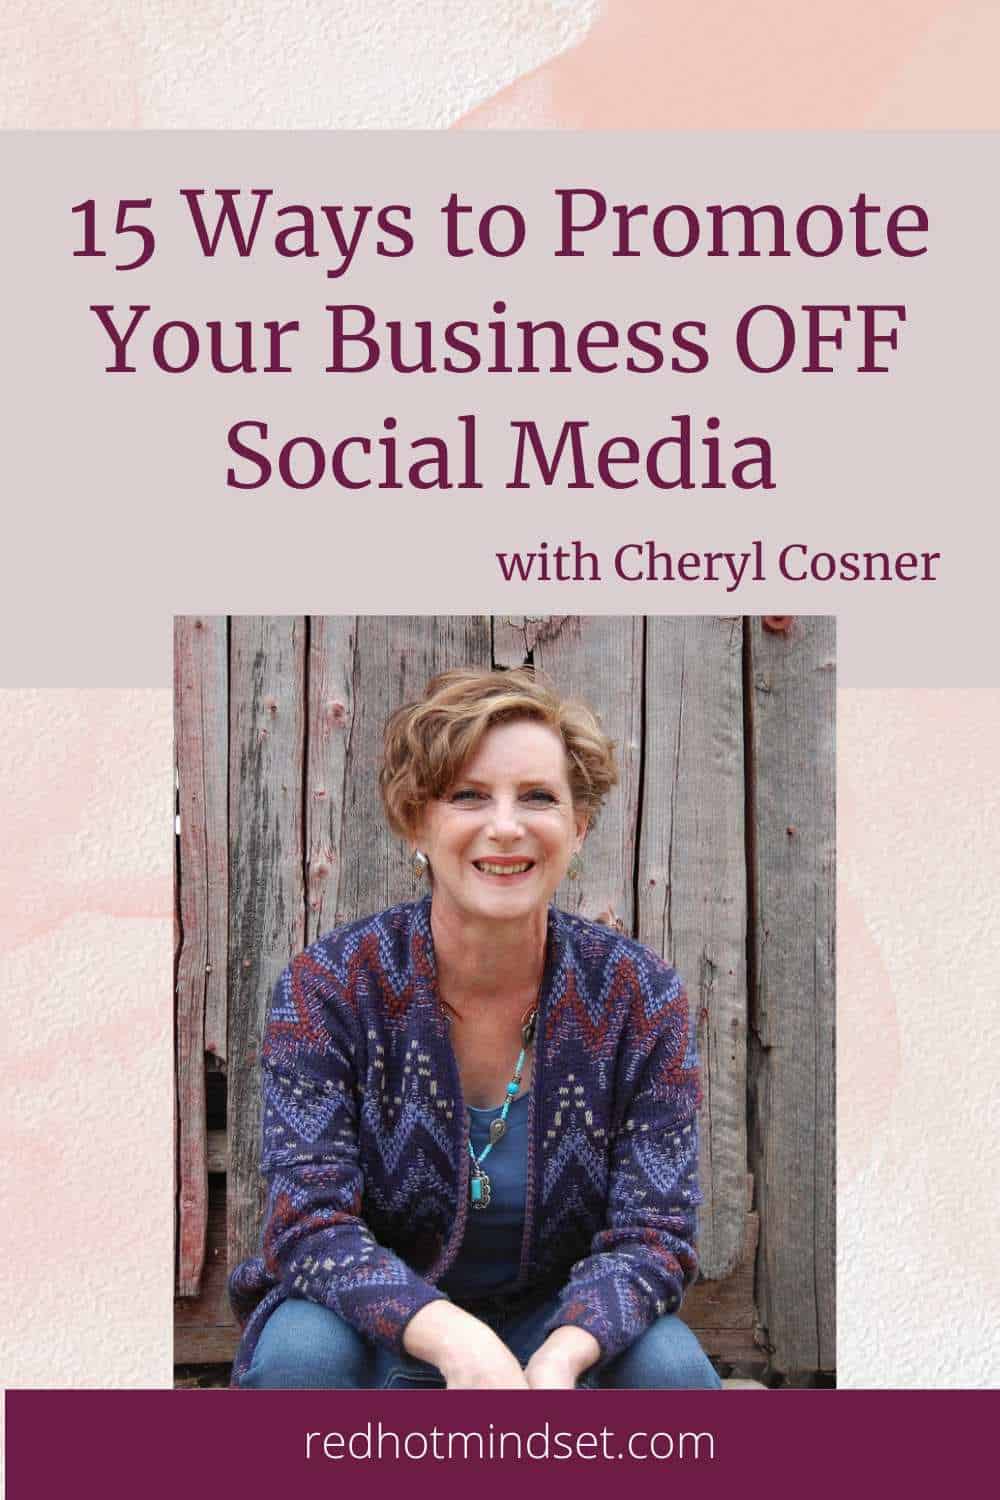 Ep 214 | 15 Ways to Promote Your Business OFF Social Media with Cheryl Cosner